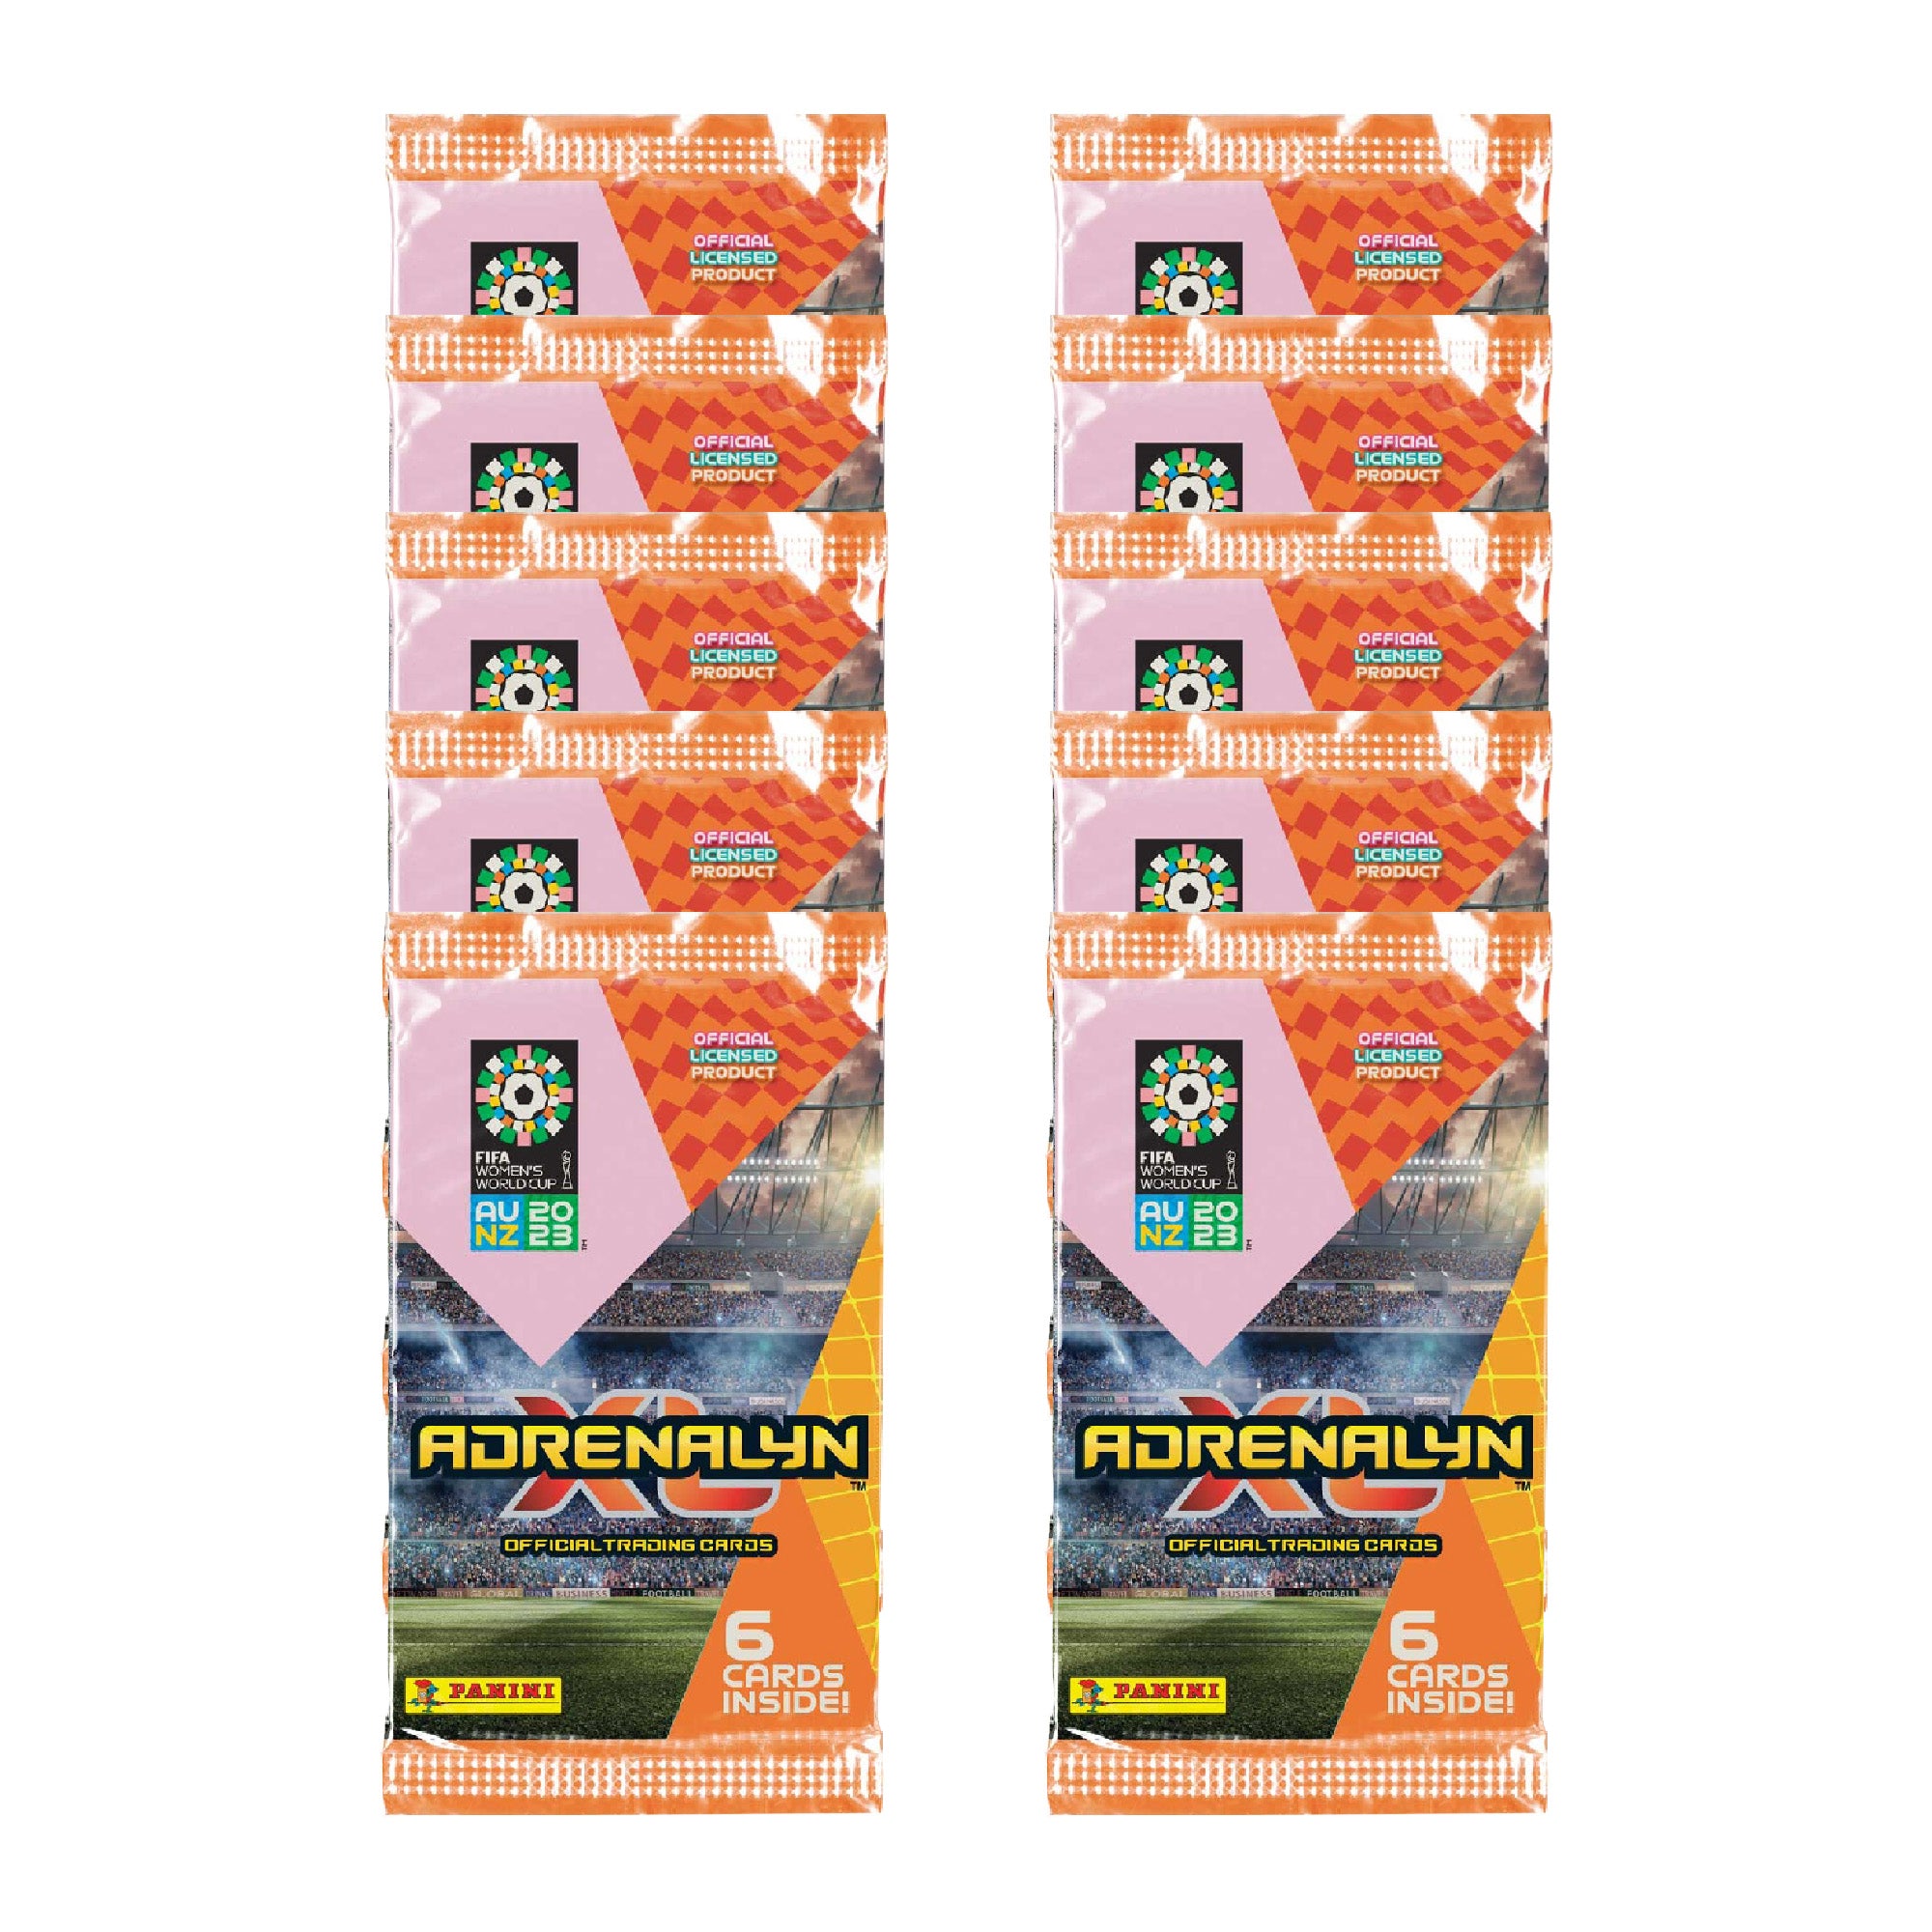 2023 PANINI ADRENALYN XL WOMEN'S FIFA WORLD CUP CARDS - 10-PACK SET (60 CARDS)